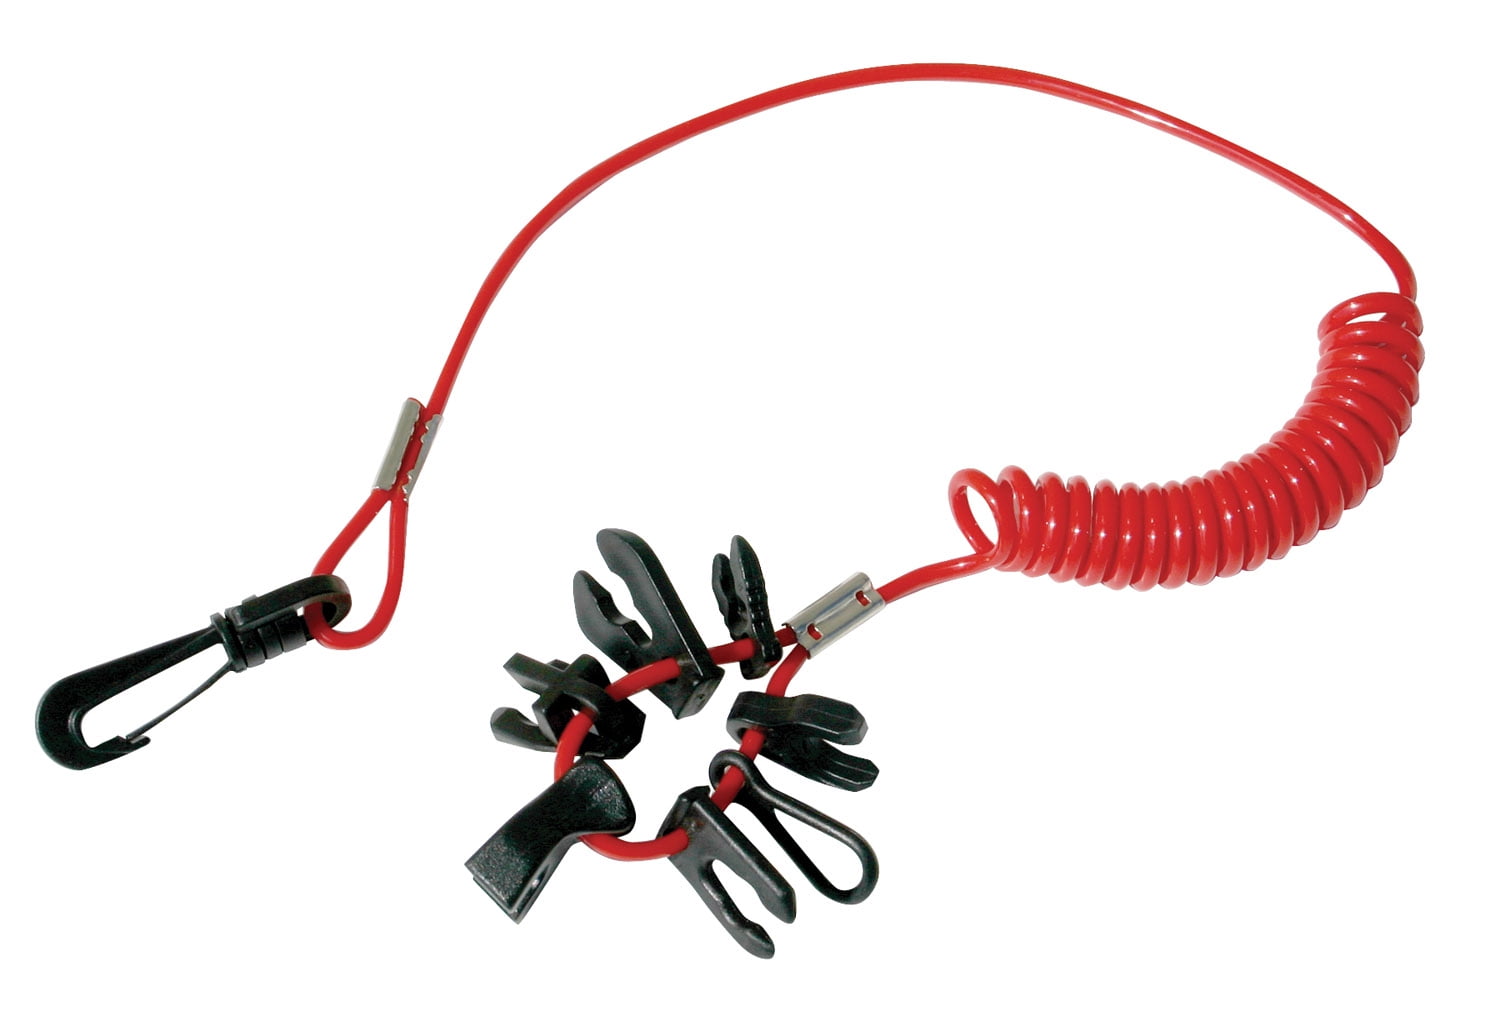 Details about   STONCEL Safety Boat Motor Outboard Kill Switch Key Lanyard Ignition Red 2 Pack